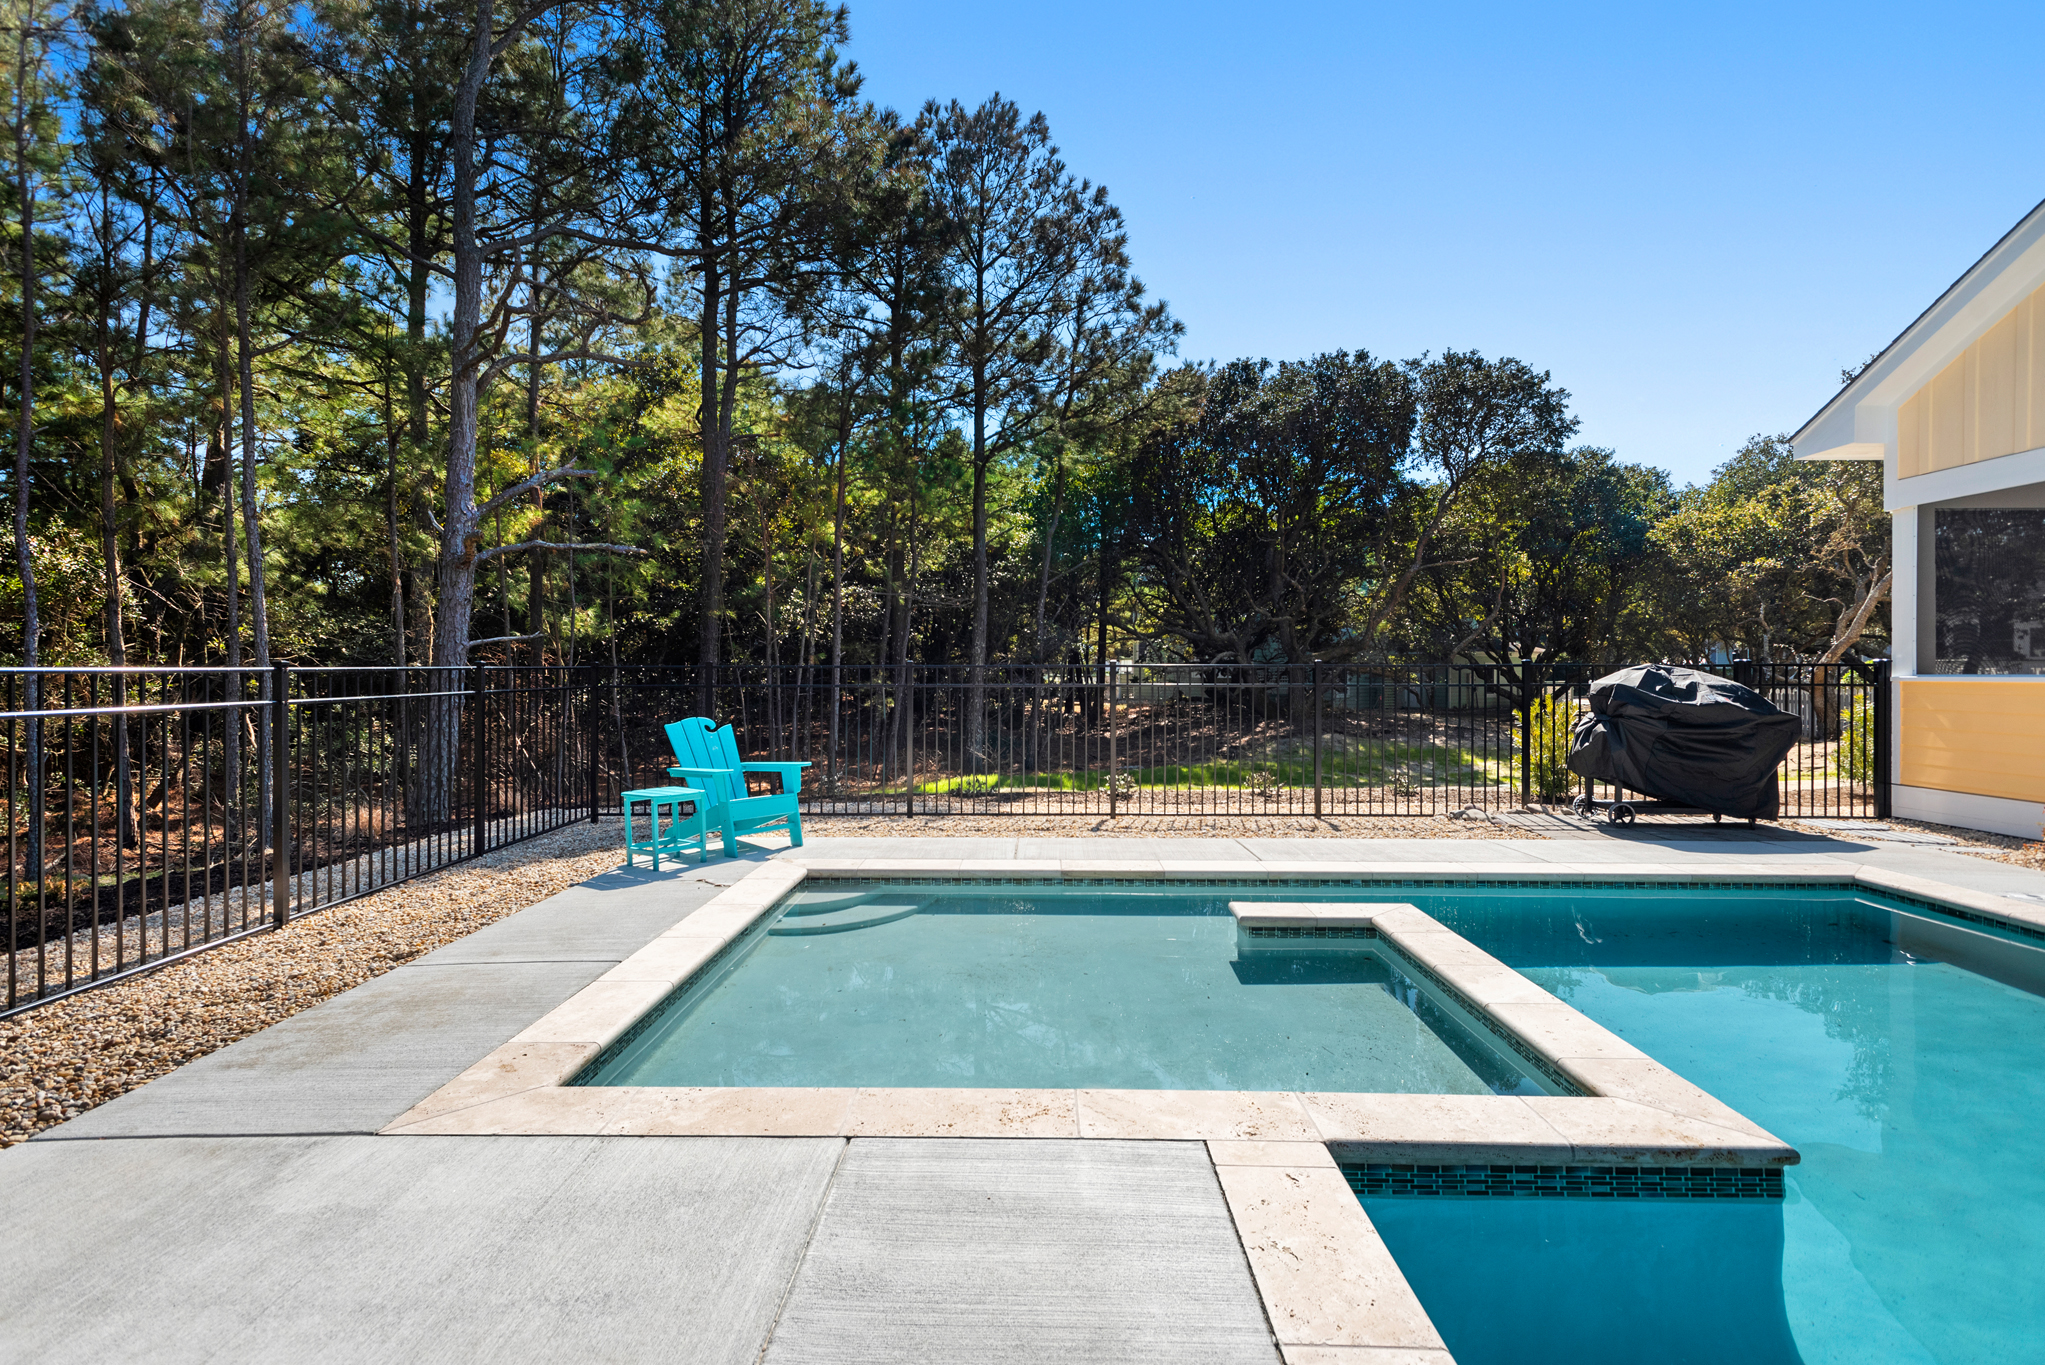 CC087: Breeze The Day | Private Pool Area